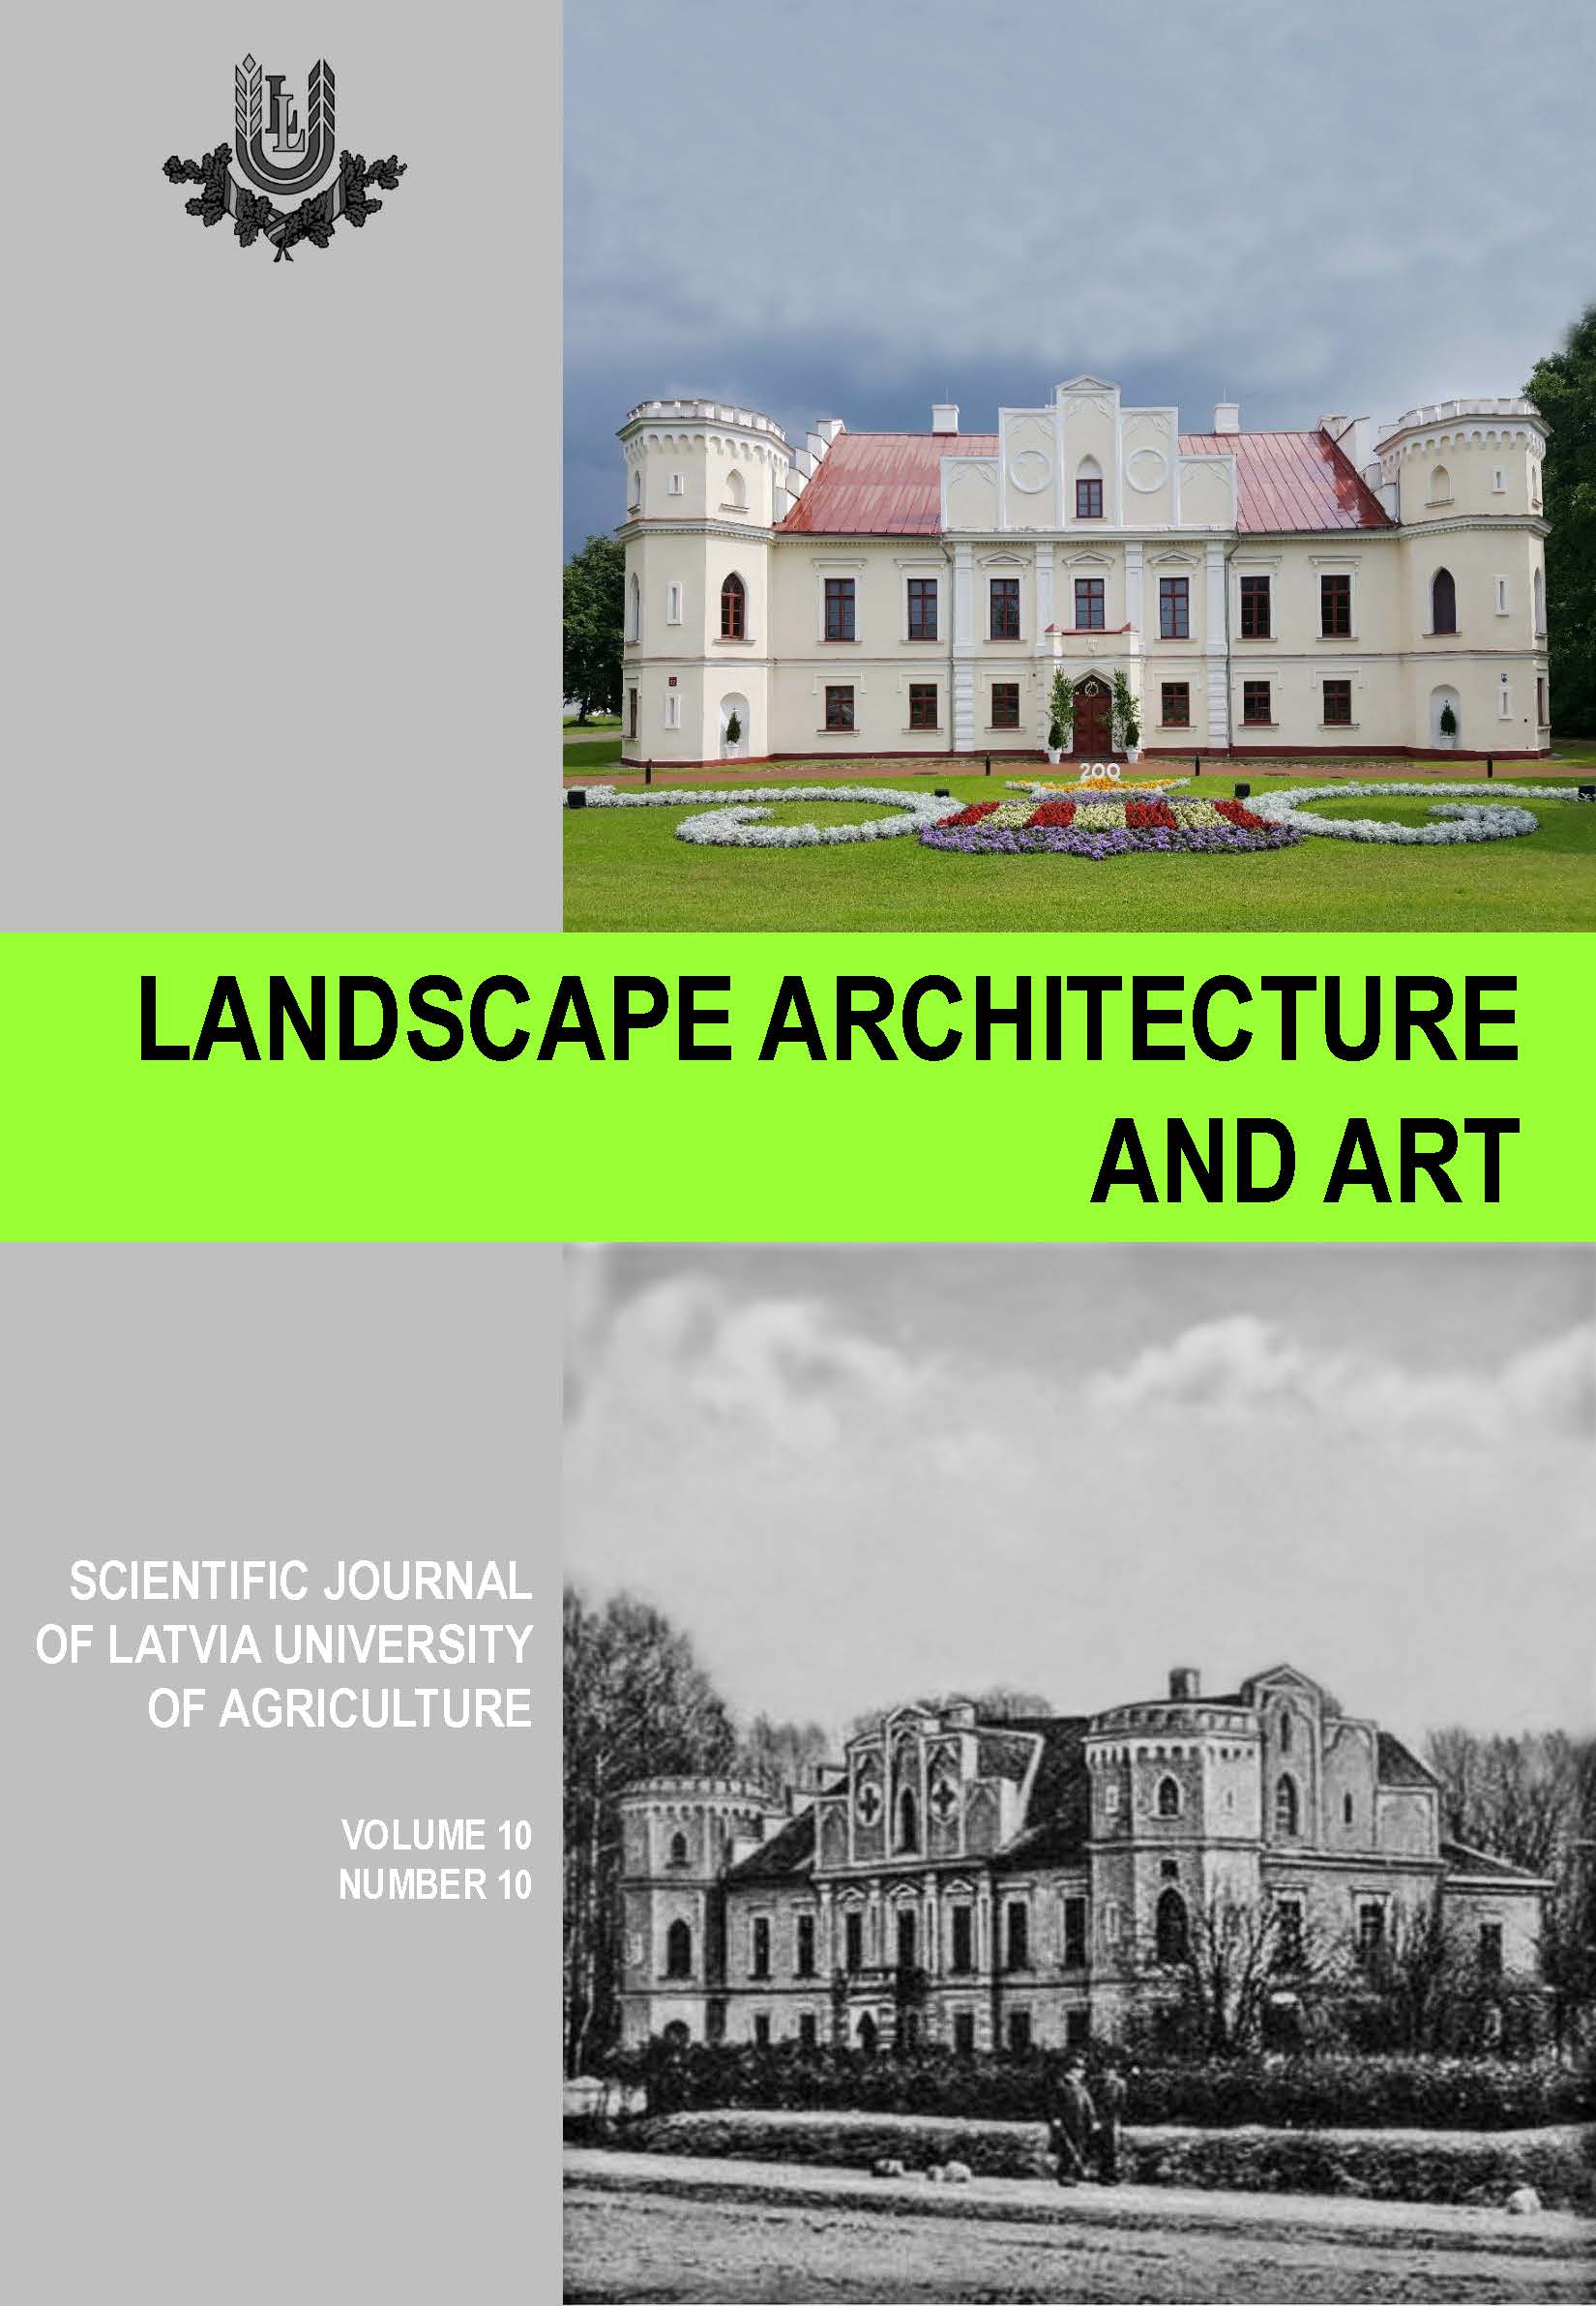 					View Vol. 10 No. 10 (2017): Landscape Architecture and Art, Volume 10, Number 10
				